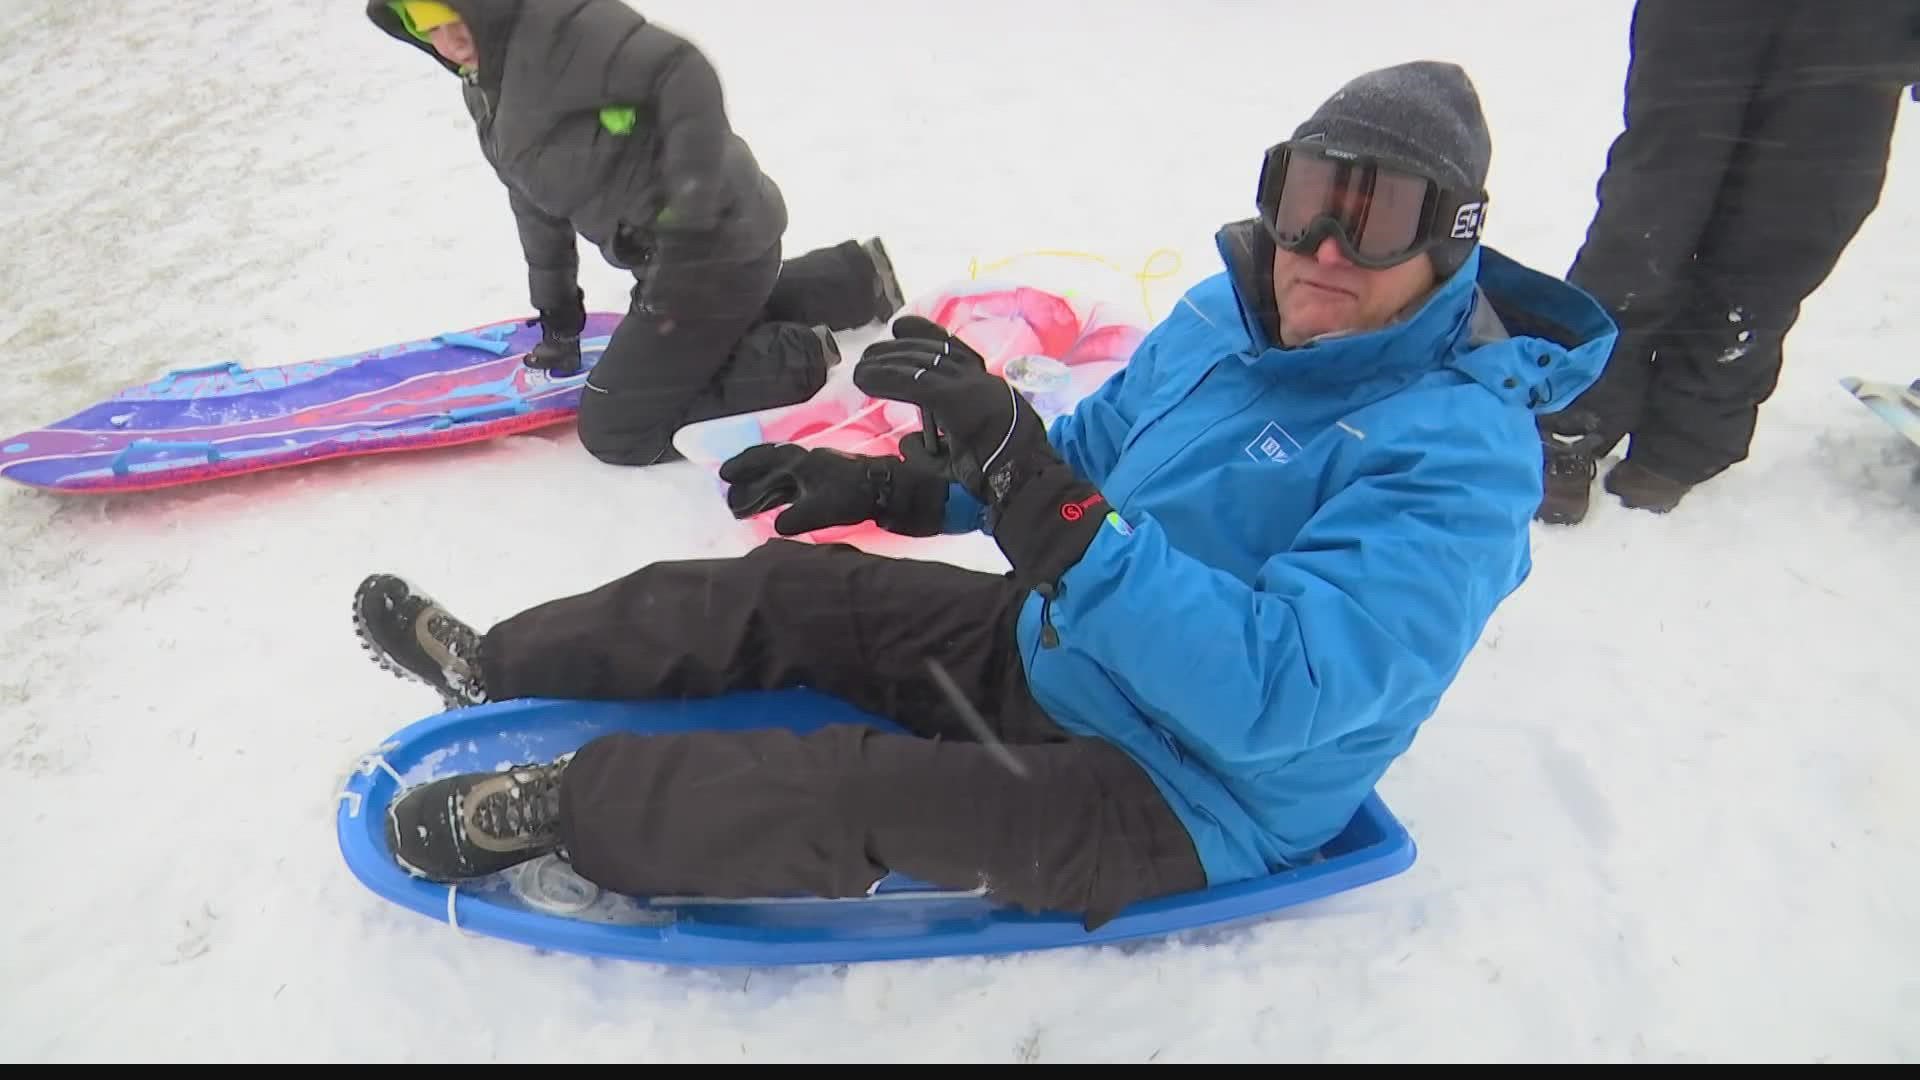 "My job today was to check out sledding conditions."